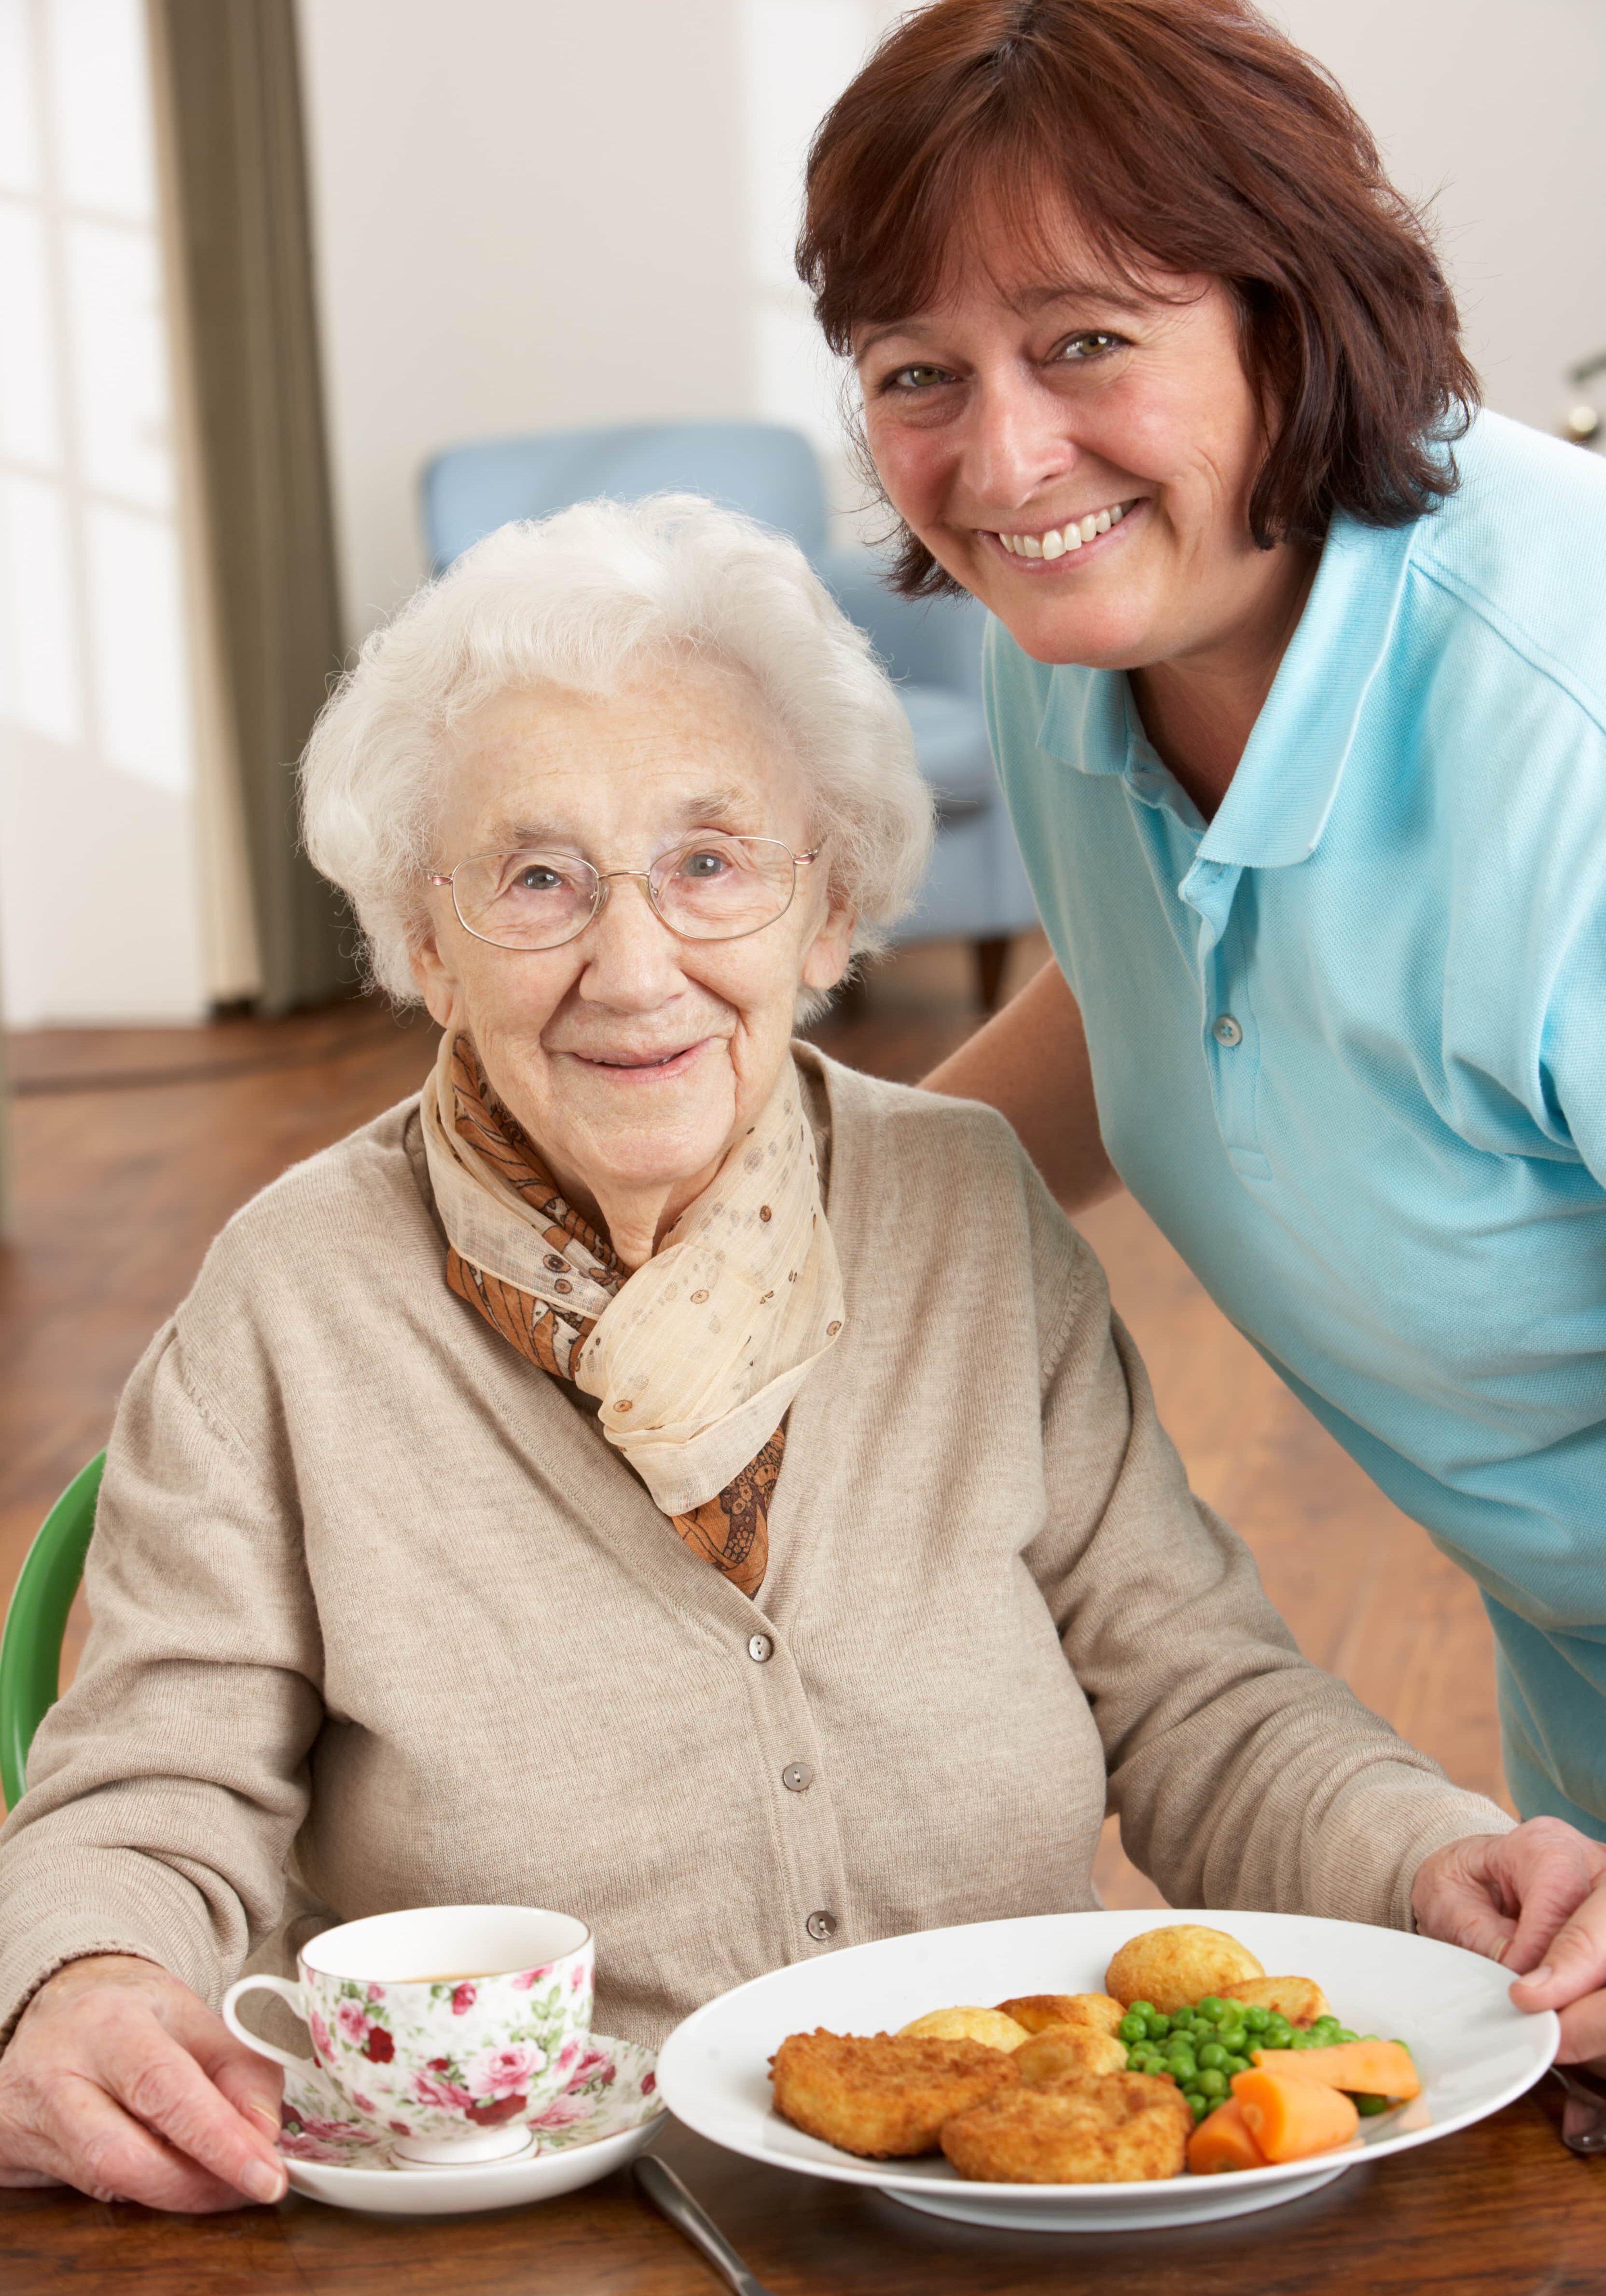 Senior woman being served meal by caregiver